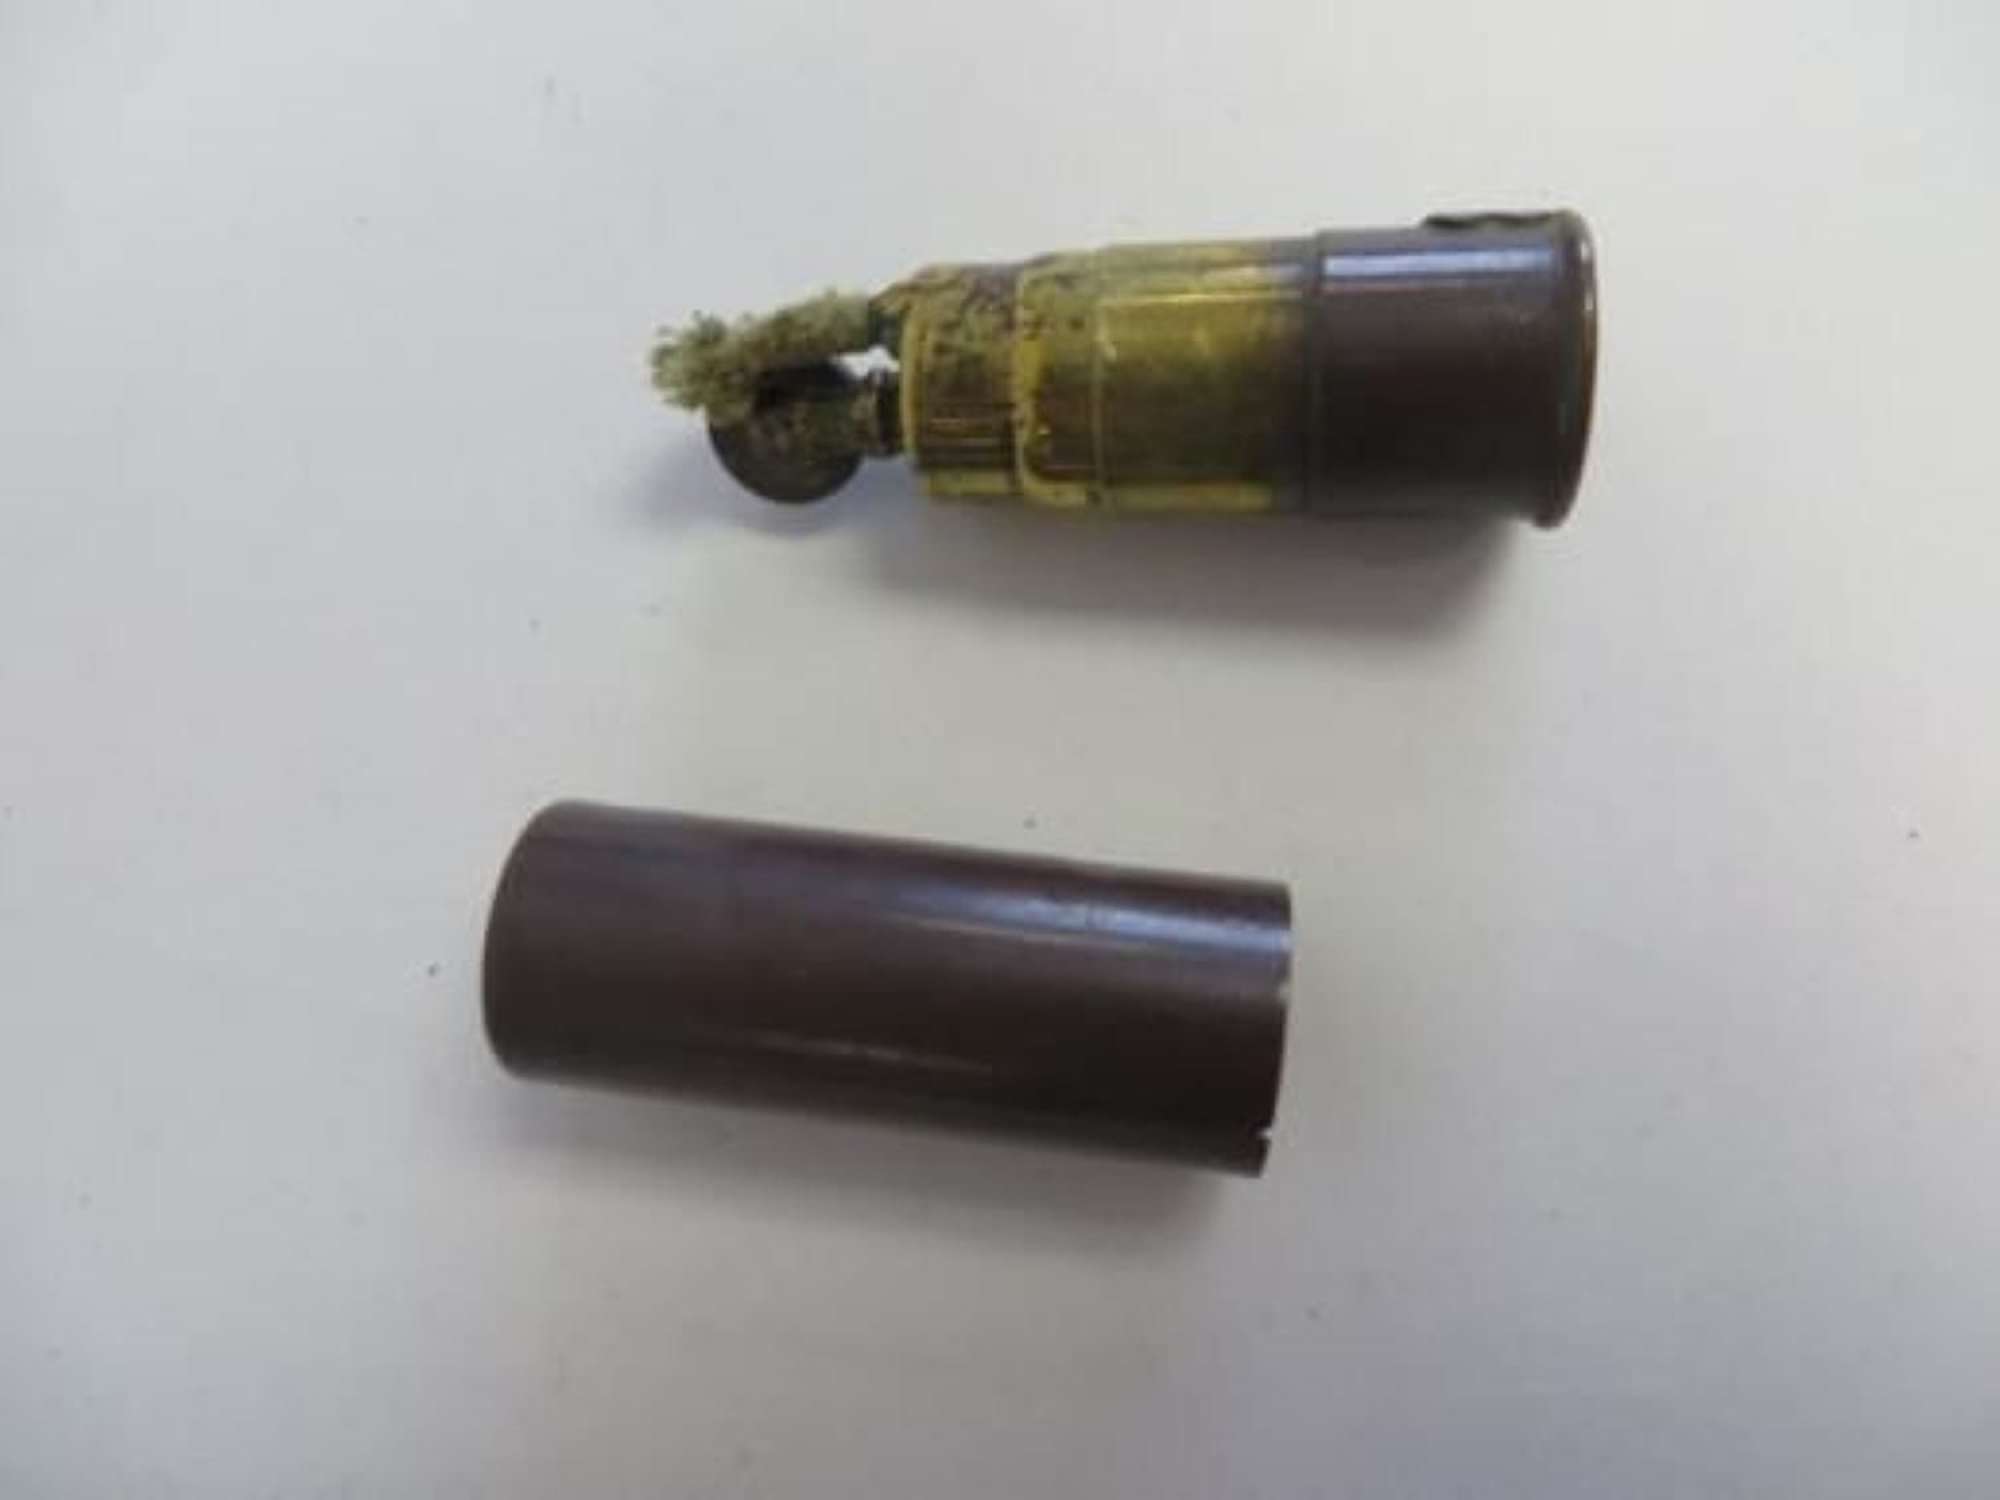 Trench Lighter in the Form of a Cartridge